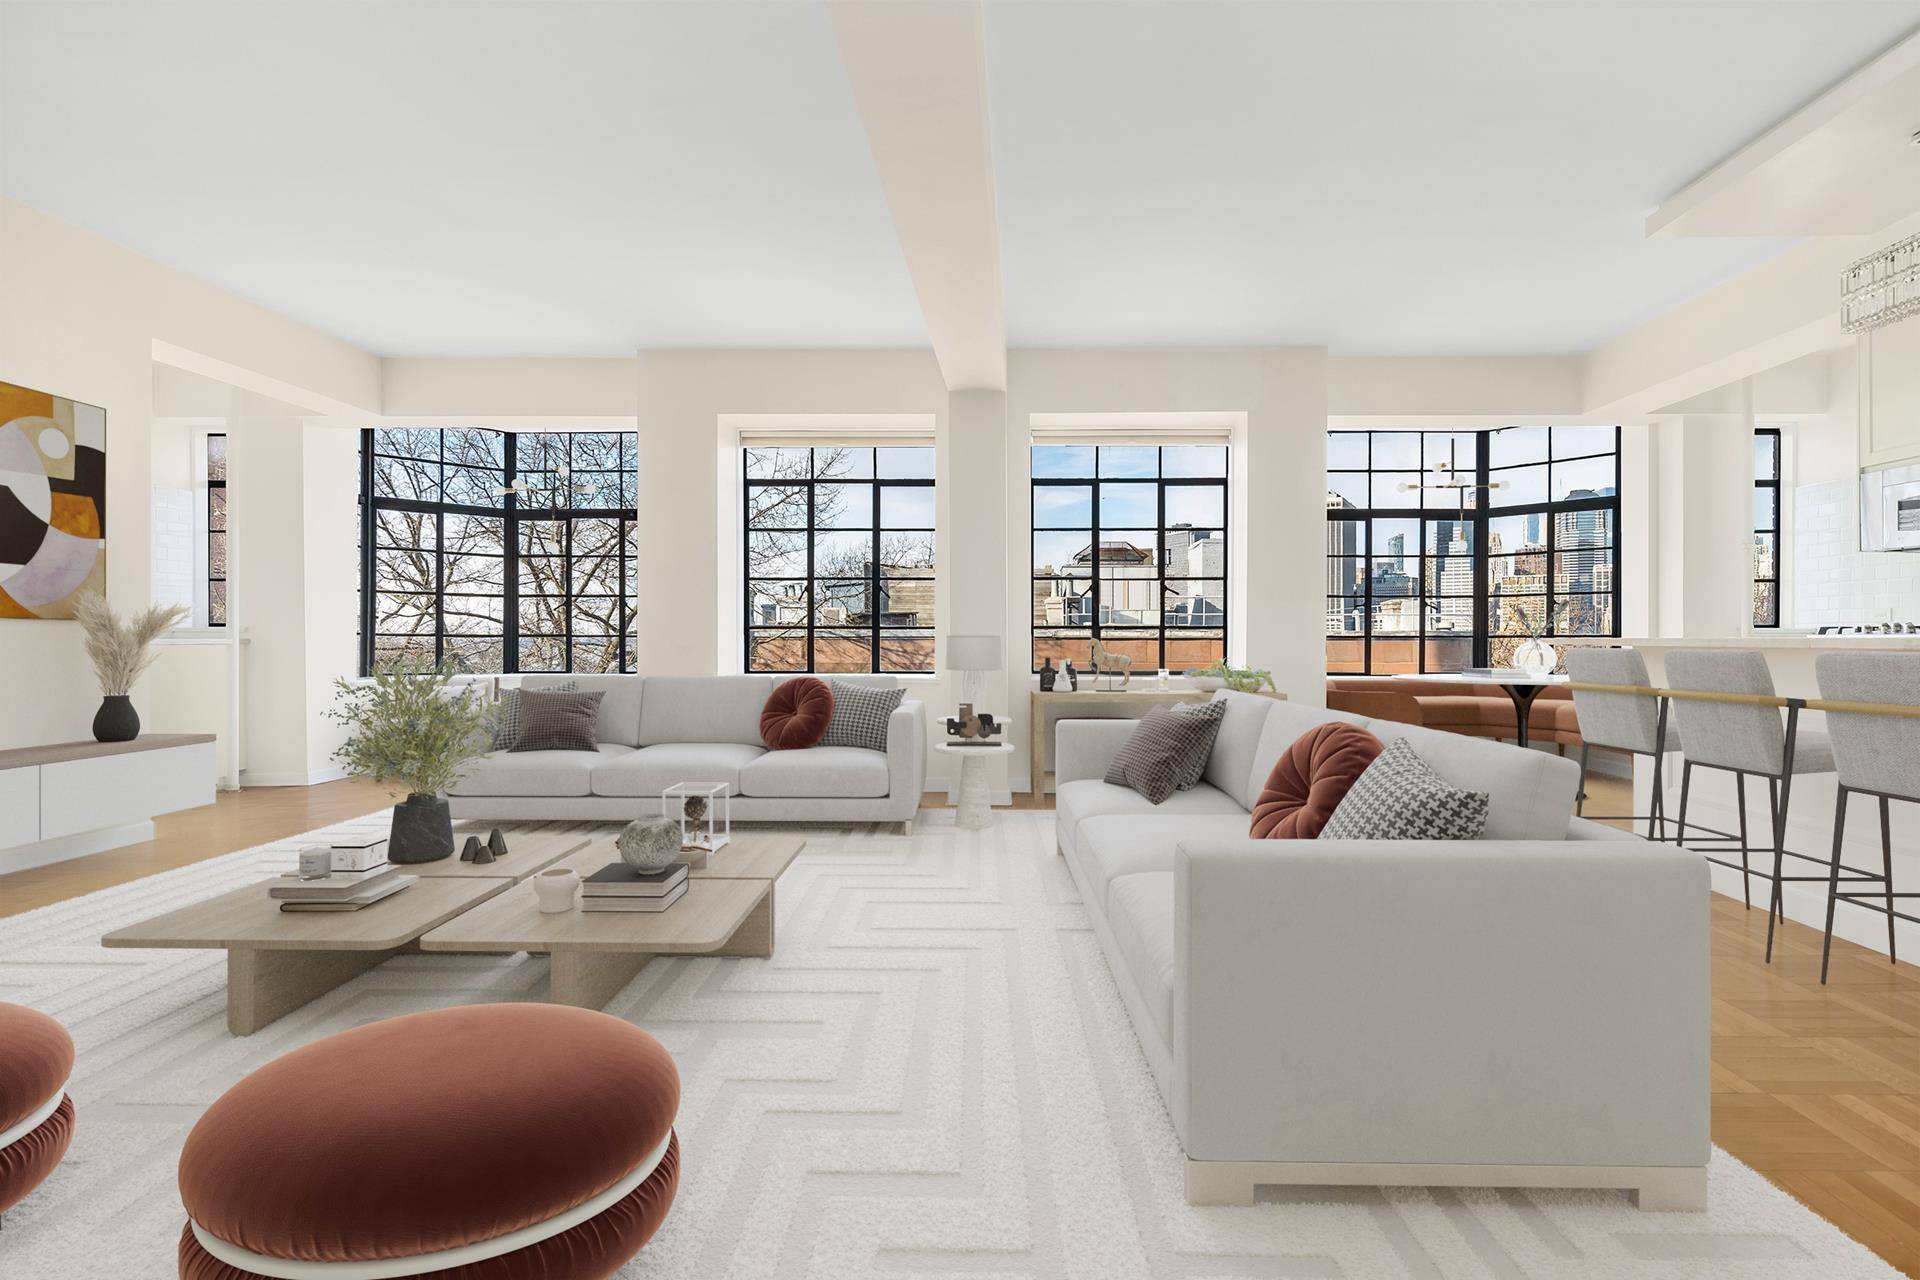 Indulge in the epitome of Brooklyn Heights living with this grand two bedroom gem nestled in the prestigious Breukelen building on Montague Street.